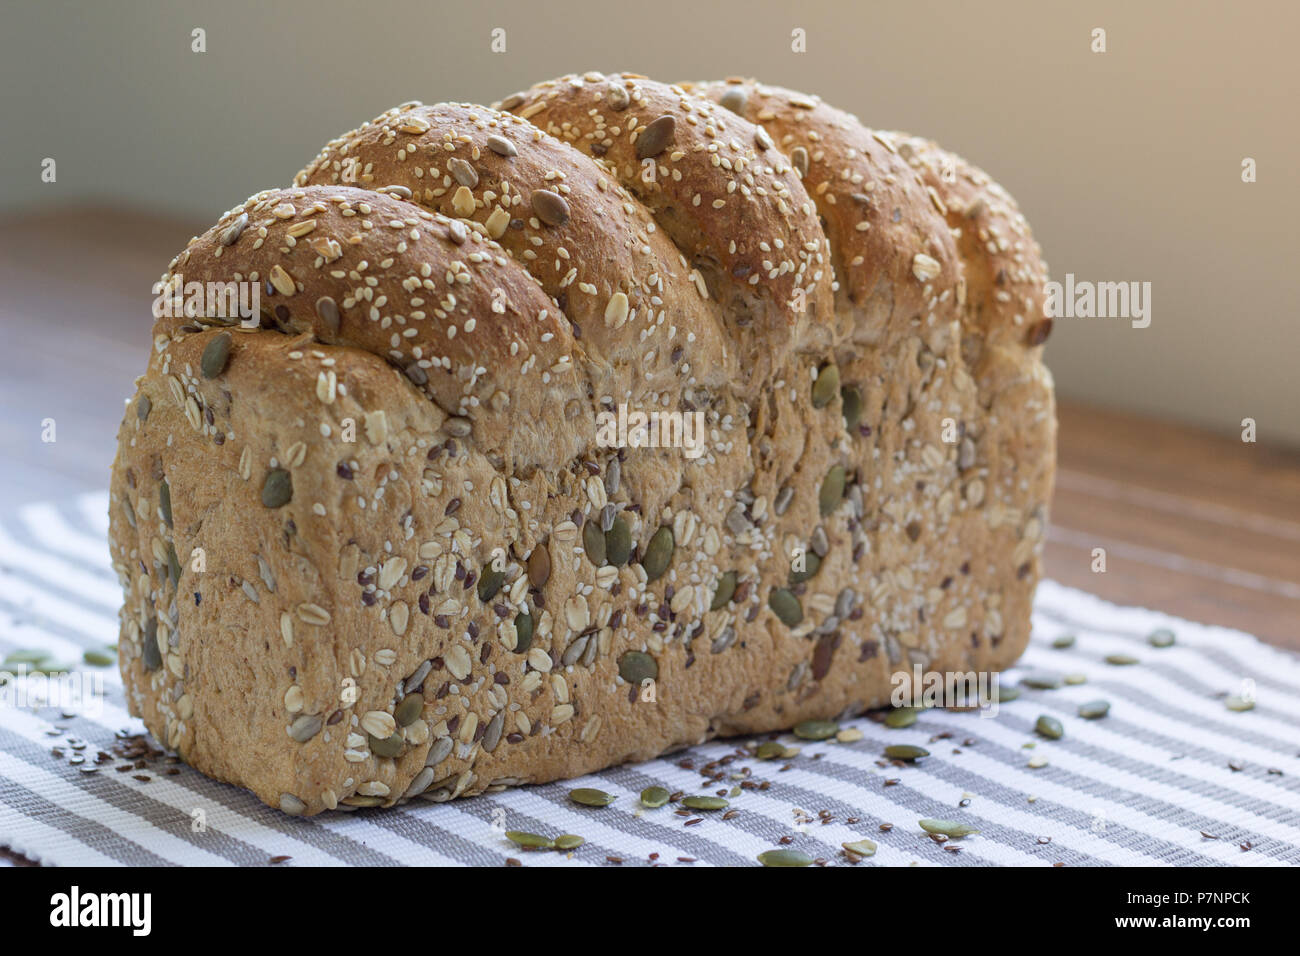 Single loaf of seeded multigrain bread sitting on striped cloth Stock Photo